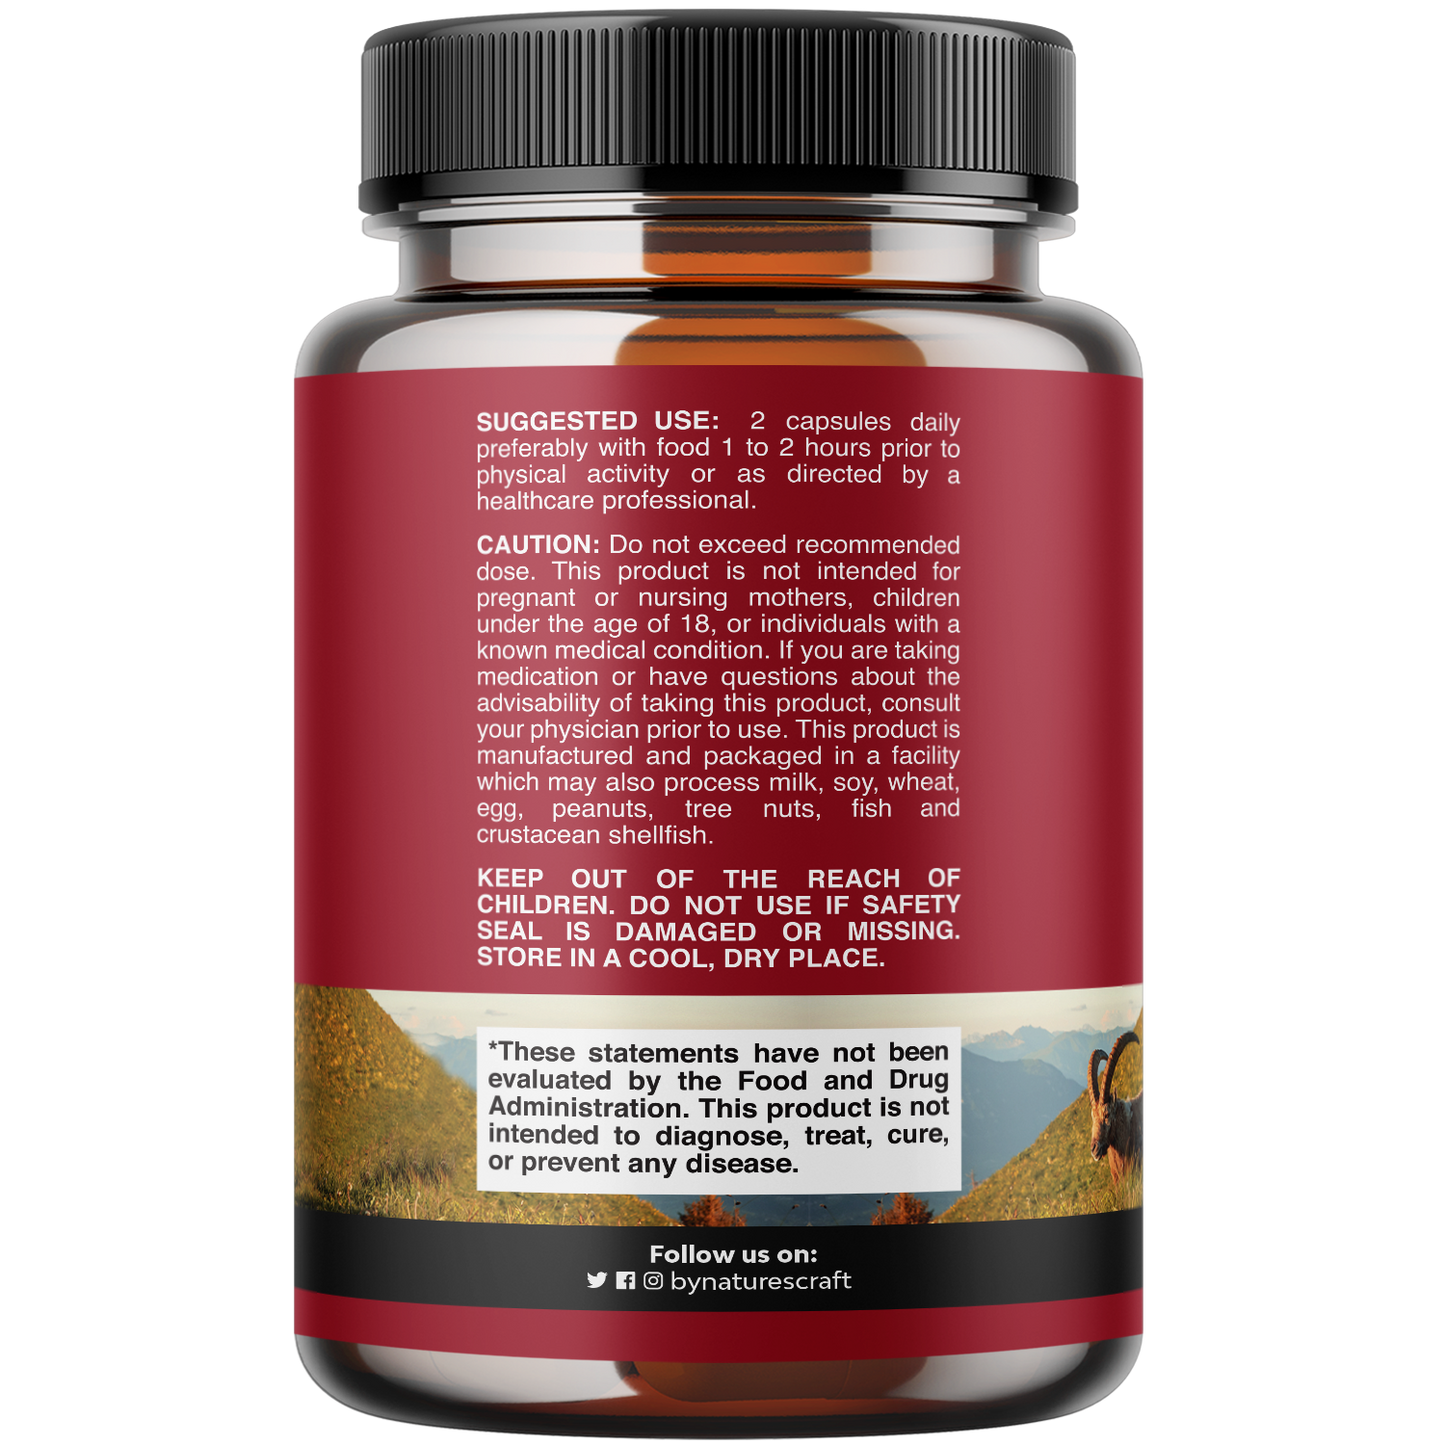 Horny Goat Weed - 20 Capsules